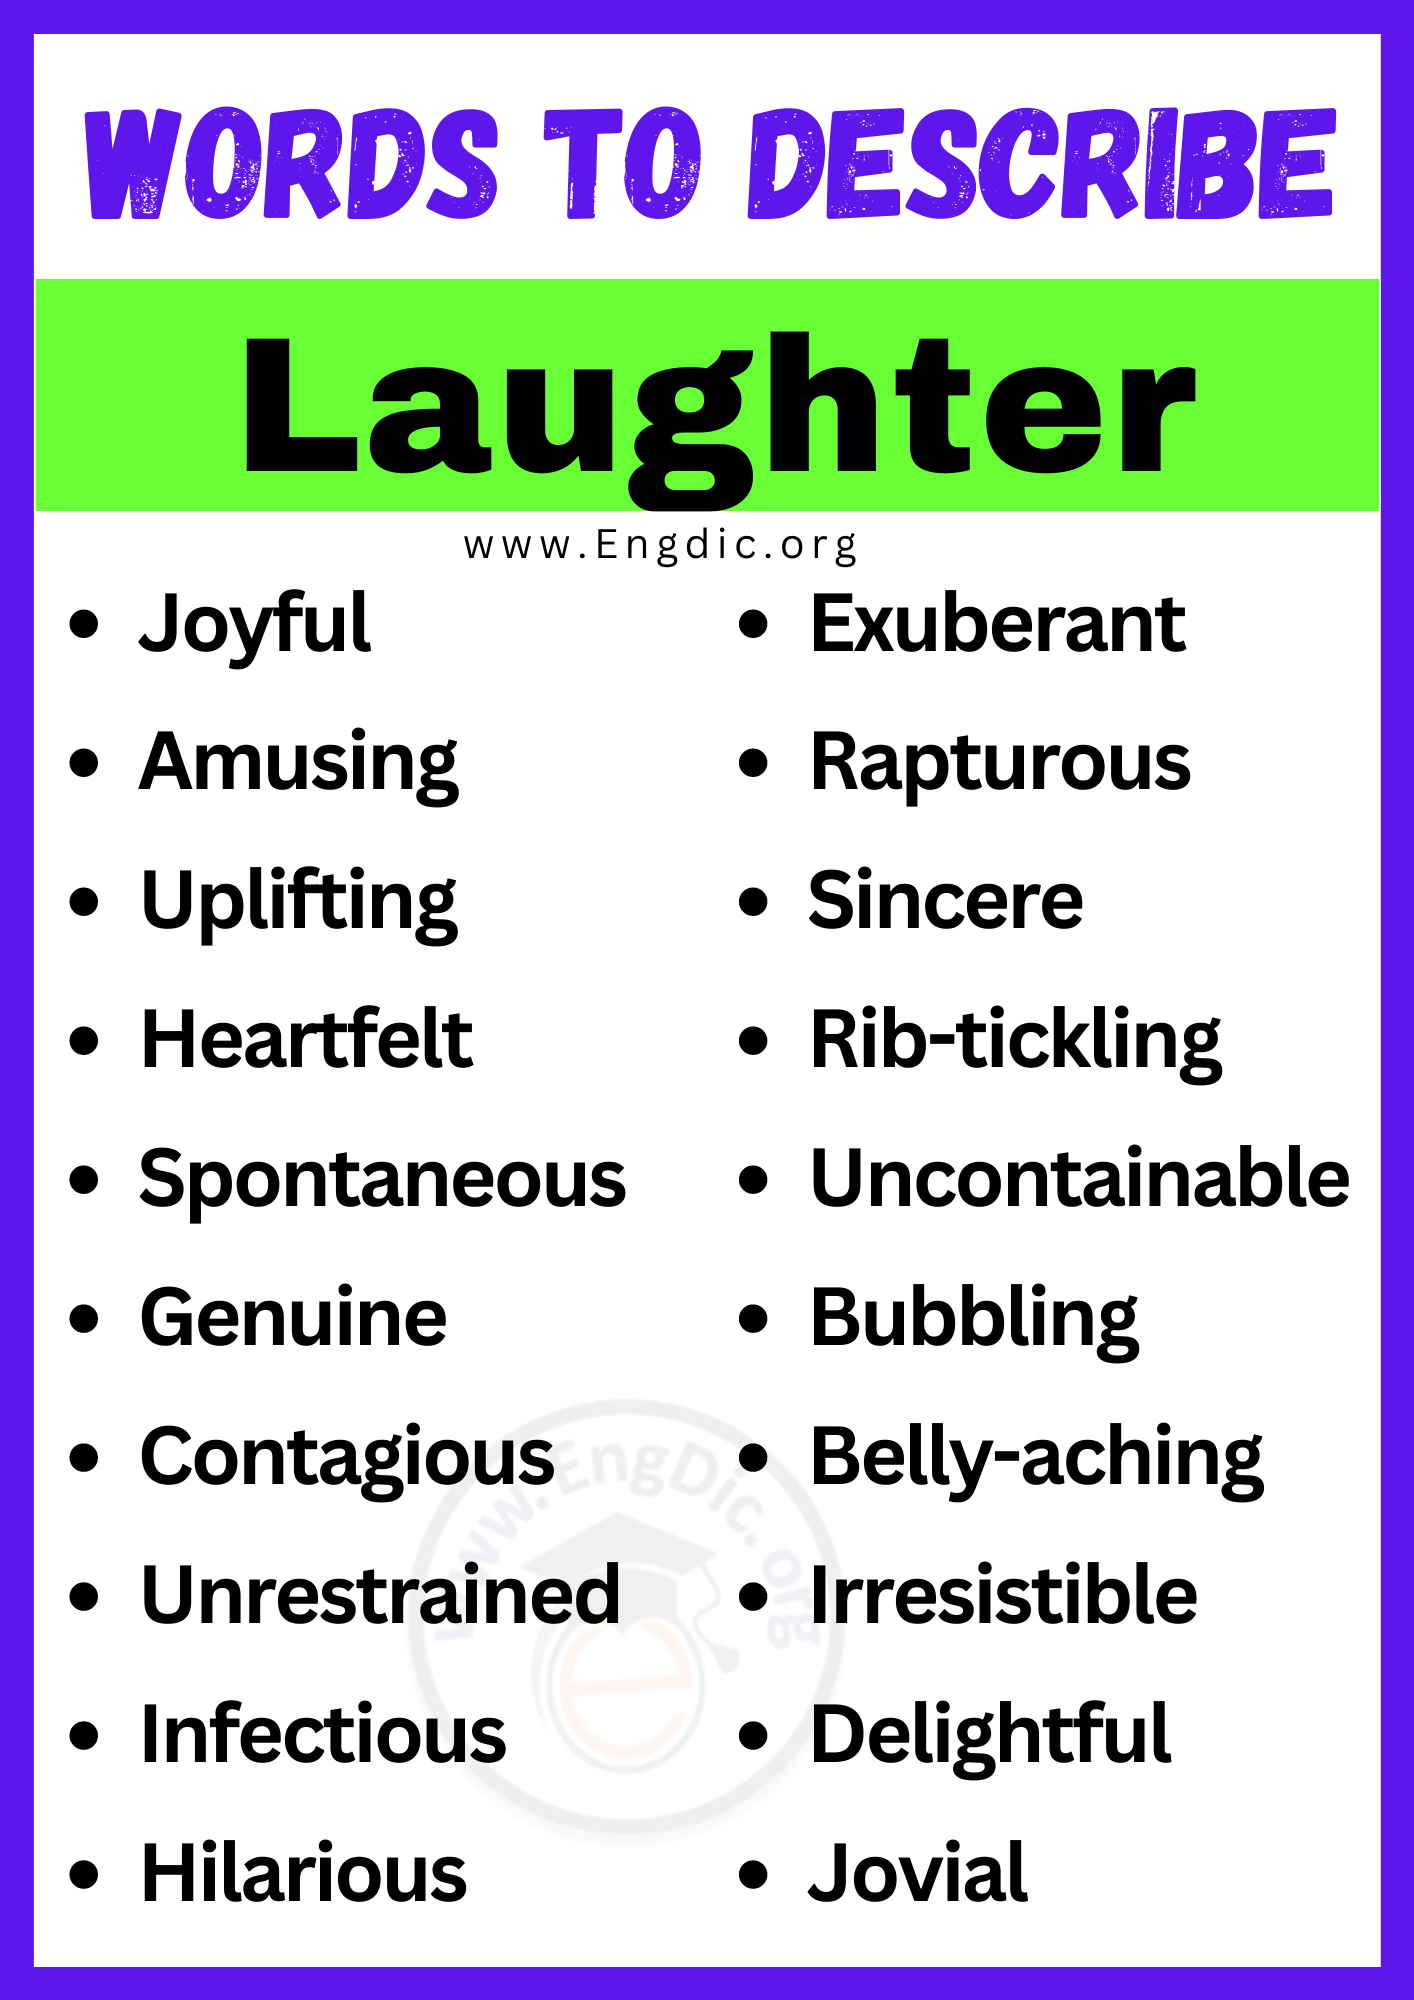 Words to Describe Laughter